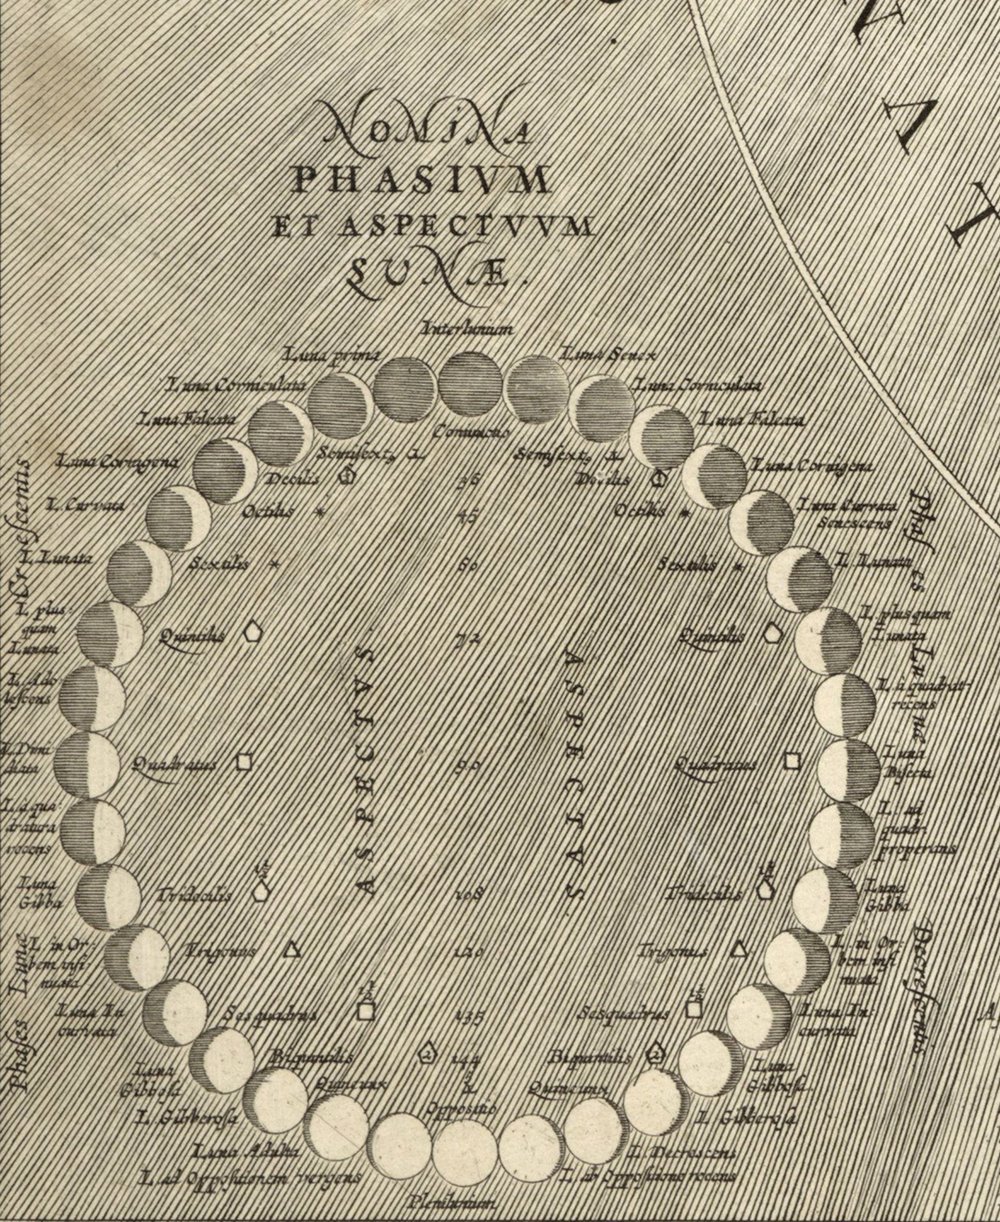 ''Map of the Earth with the different positions of the Moon and Sun'' (1708)